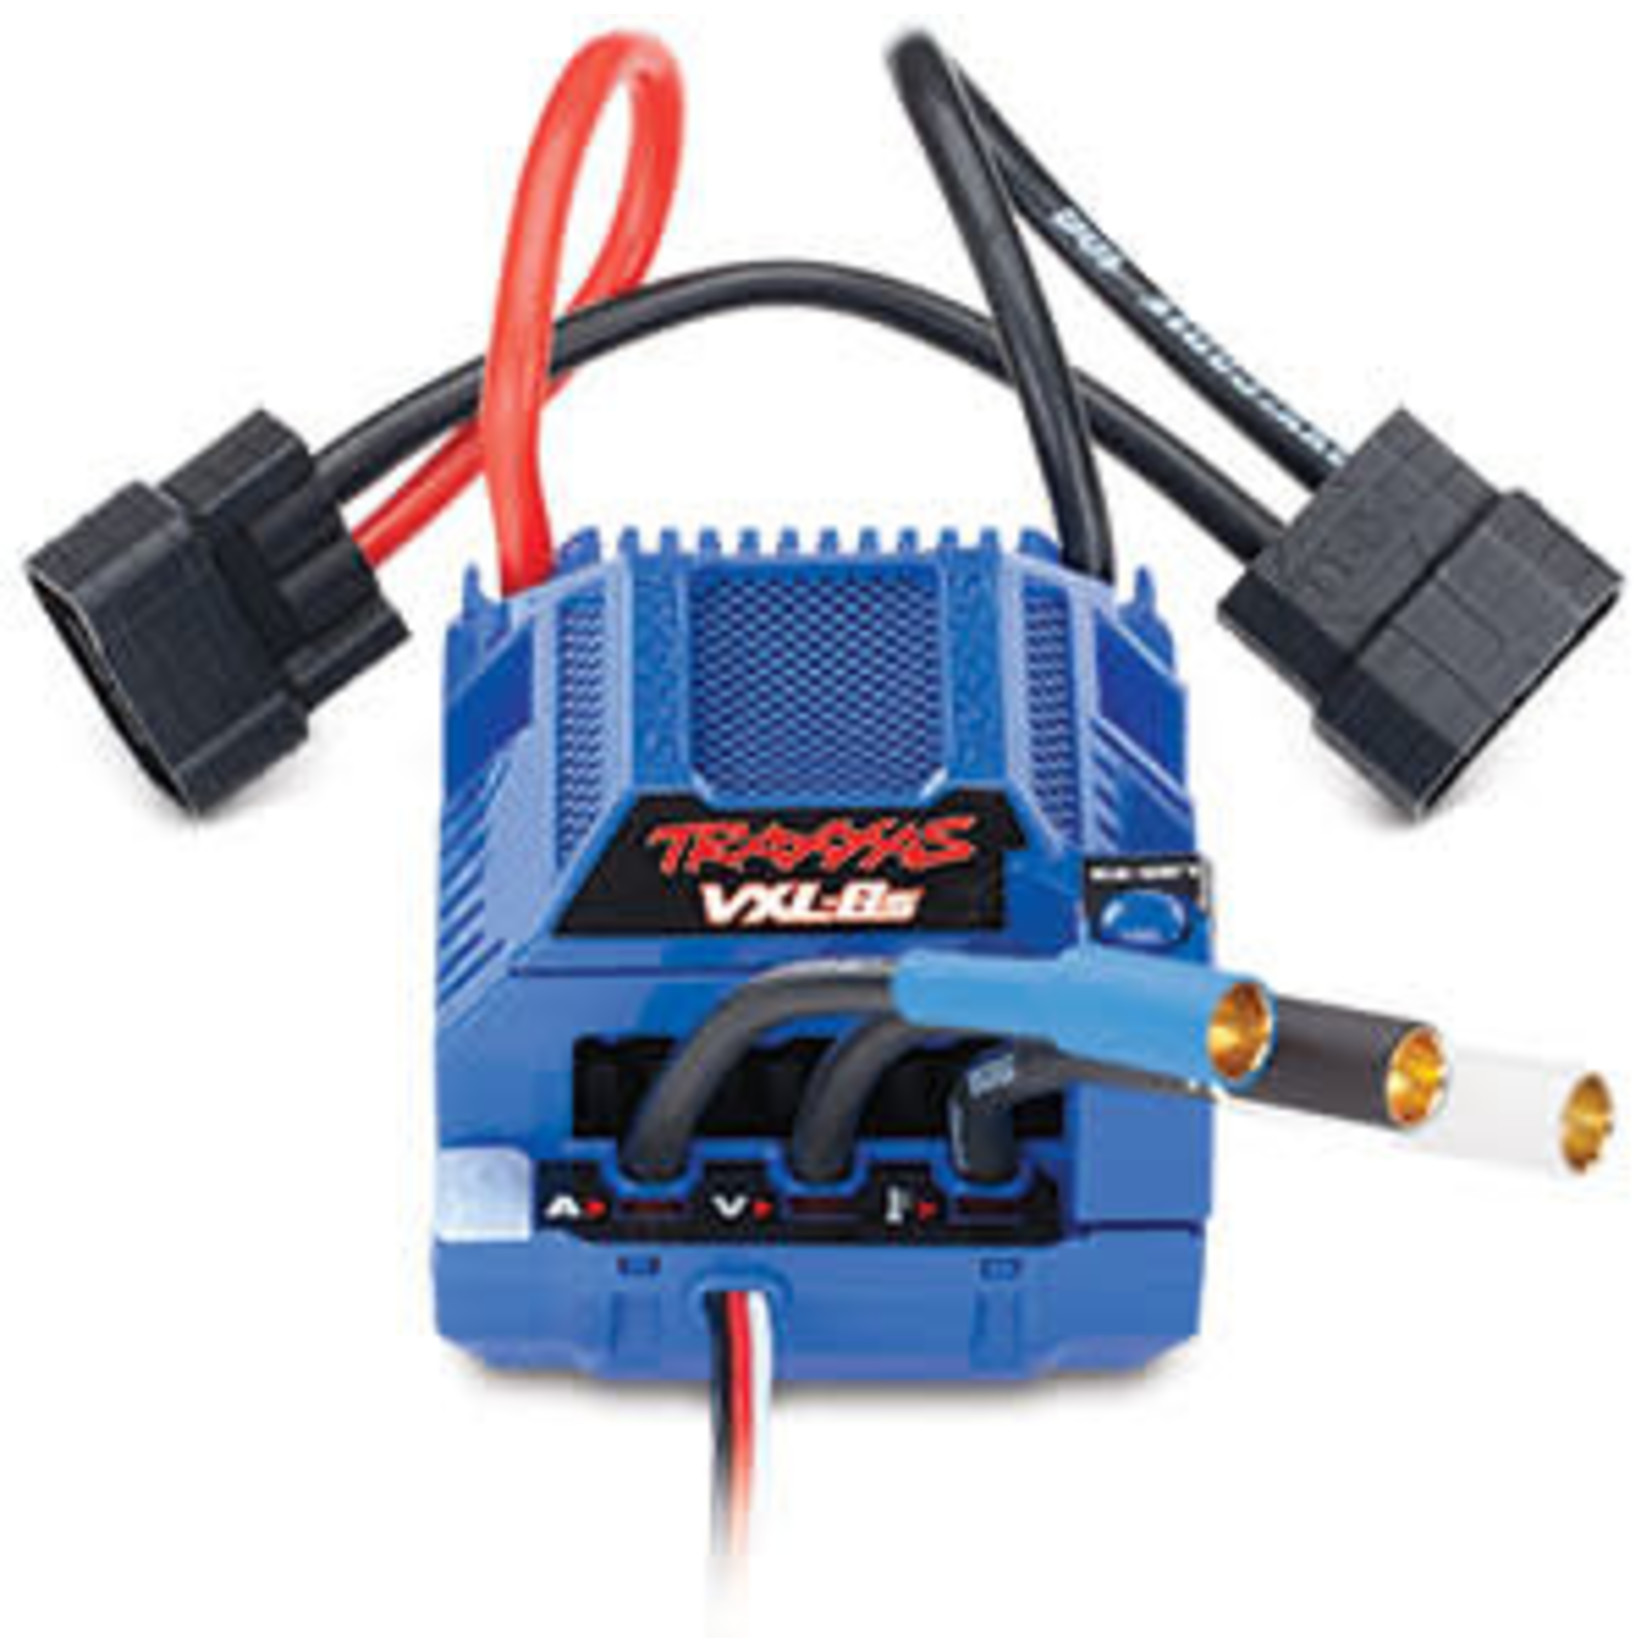 Traxxas VXL-8s Electronic Speed Control, waterproof (brushless)